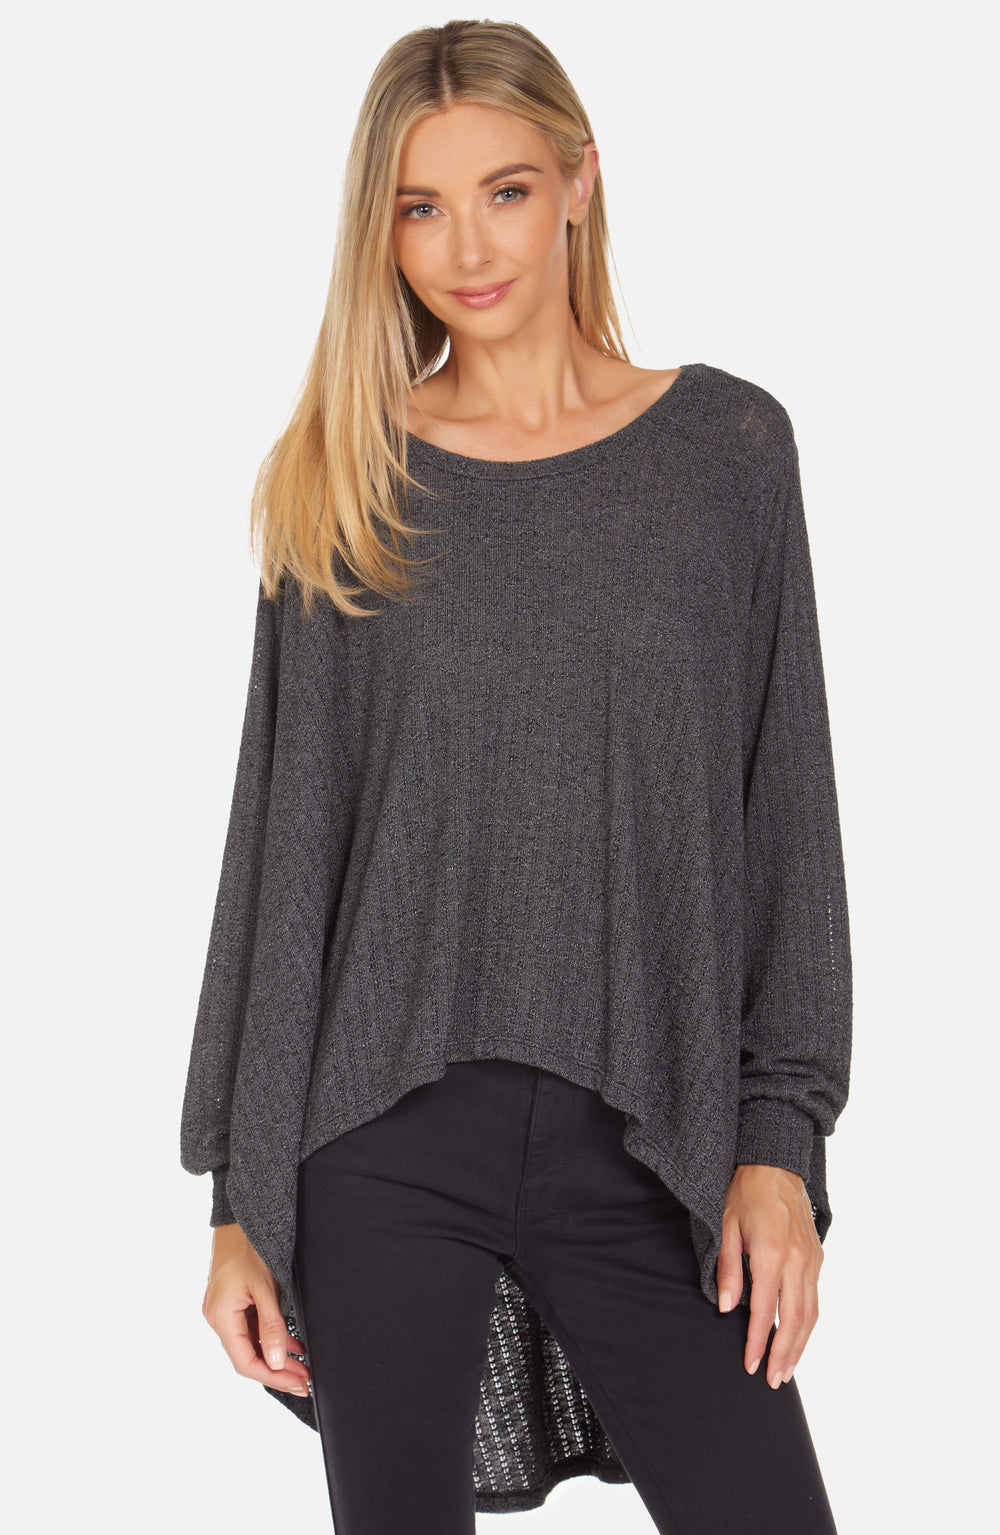 CHARCOAL FITZGERALD L/S FLOWY TOP - Kingfisher Road - Online Boutique